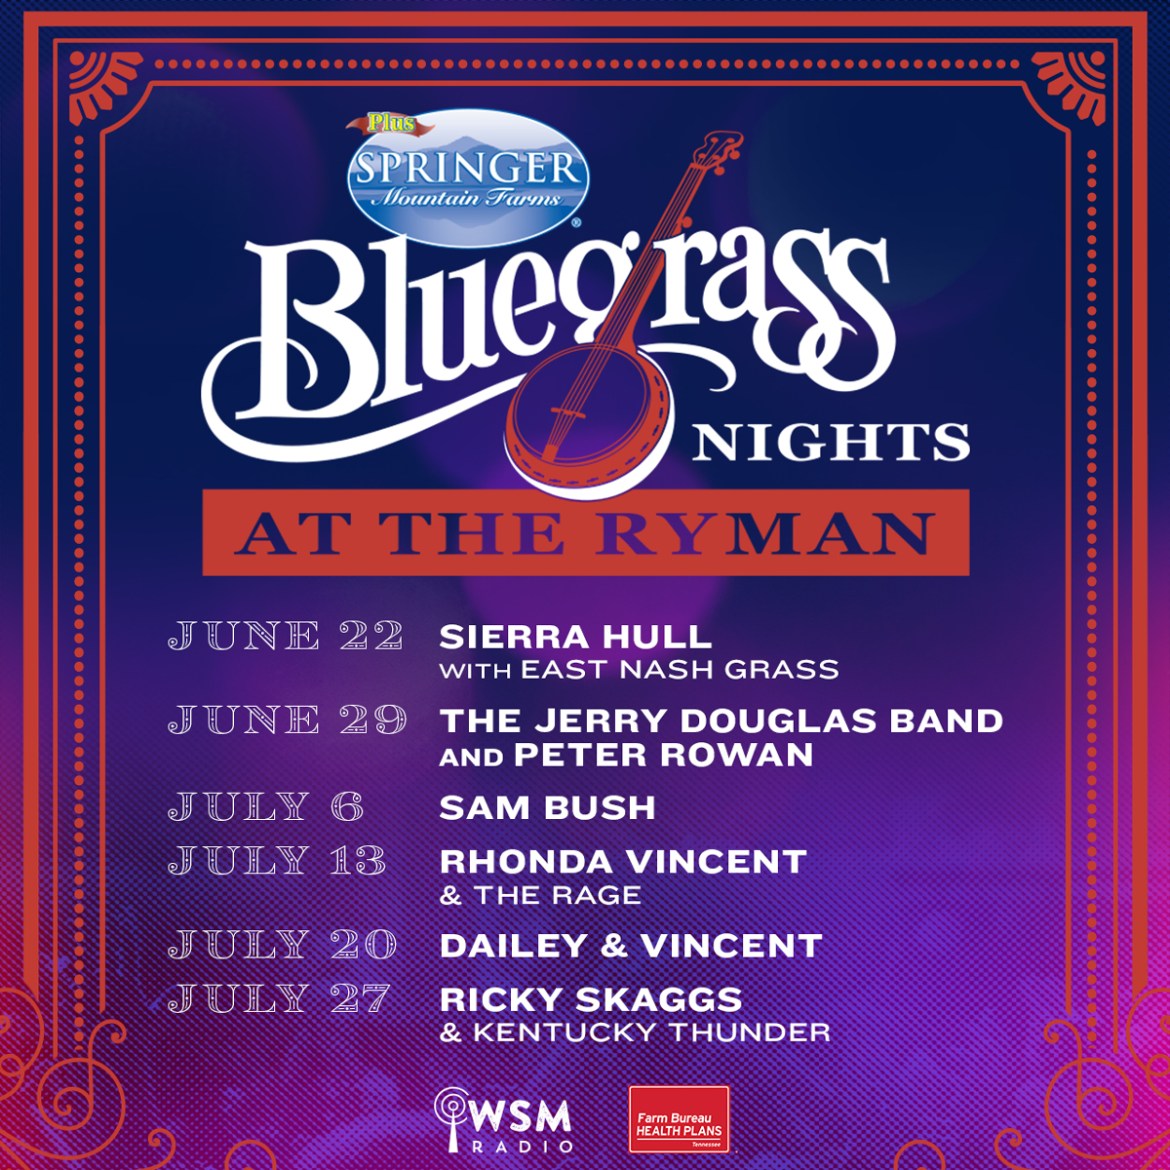 Bluegrass Nights at the Ryman is Back for 2023!